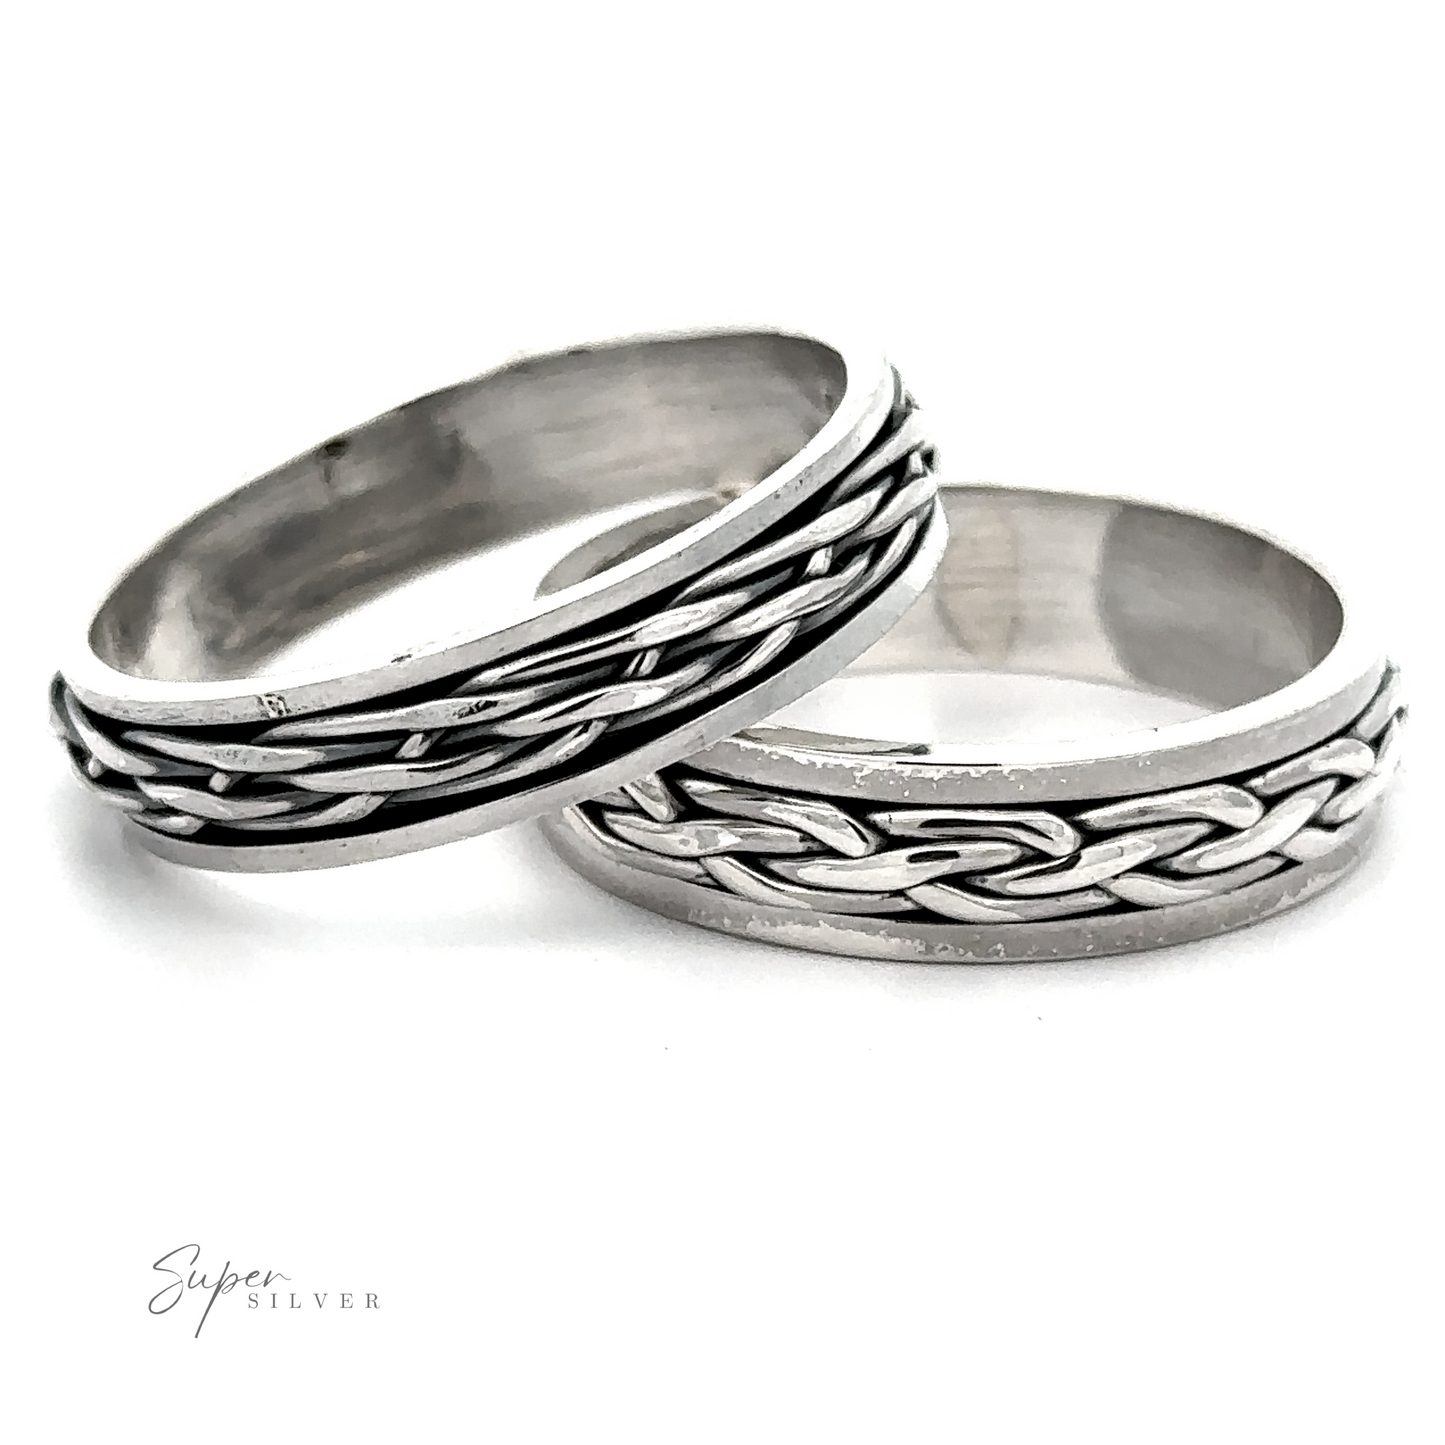 Two Unique Narrow Woven Spinner Bands with braided designs and woven wire texture.